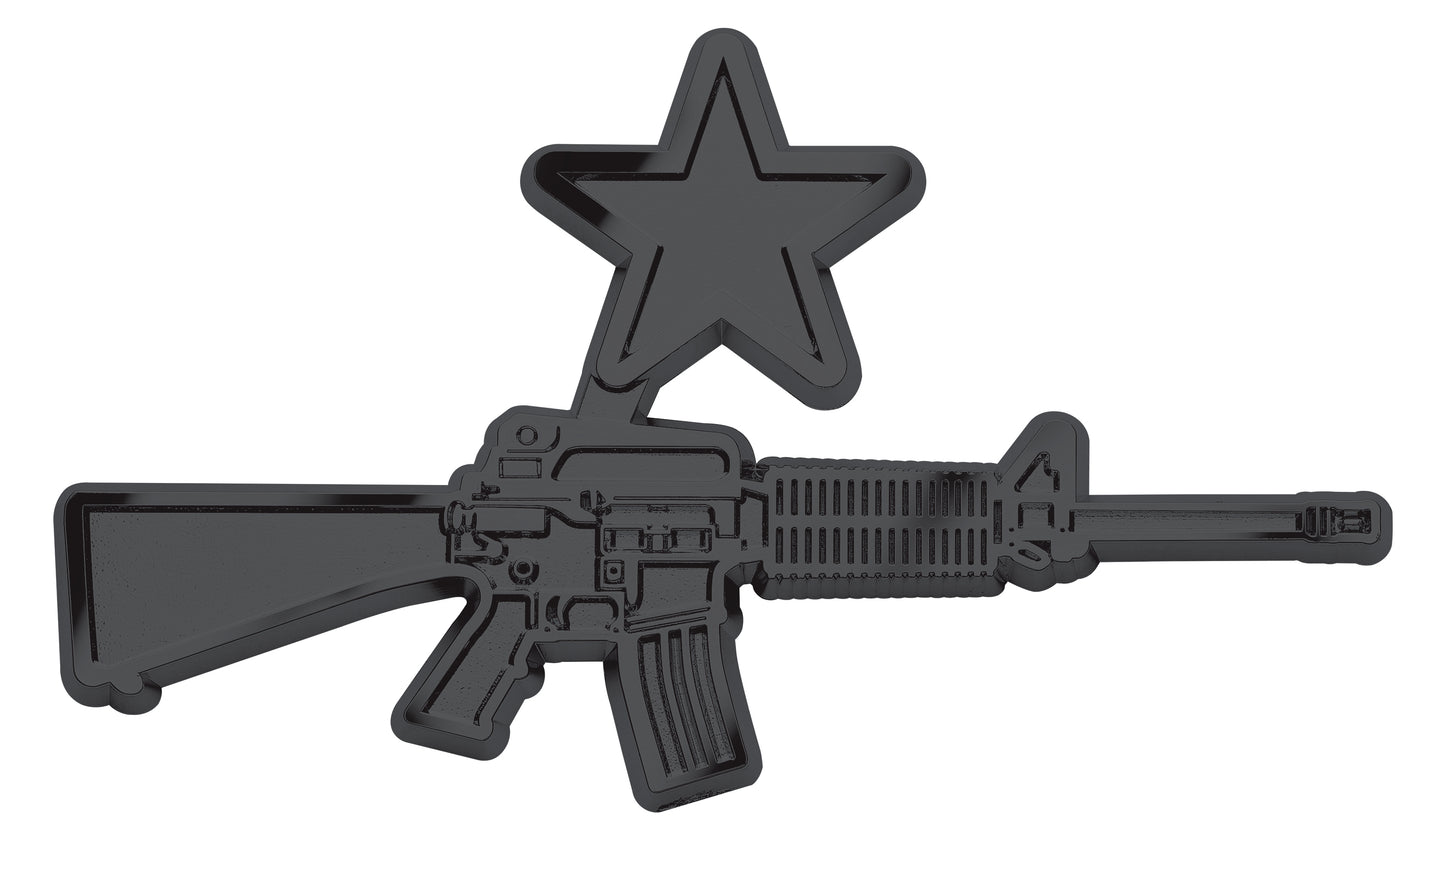 AR-15 Style "Come and Take It" Car Emblem (Tactical Black)